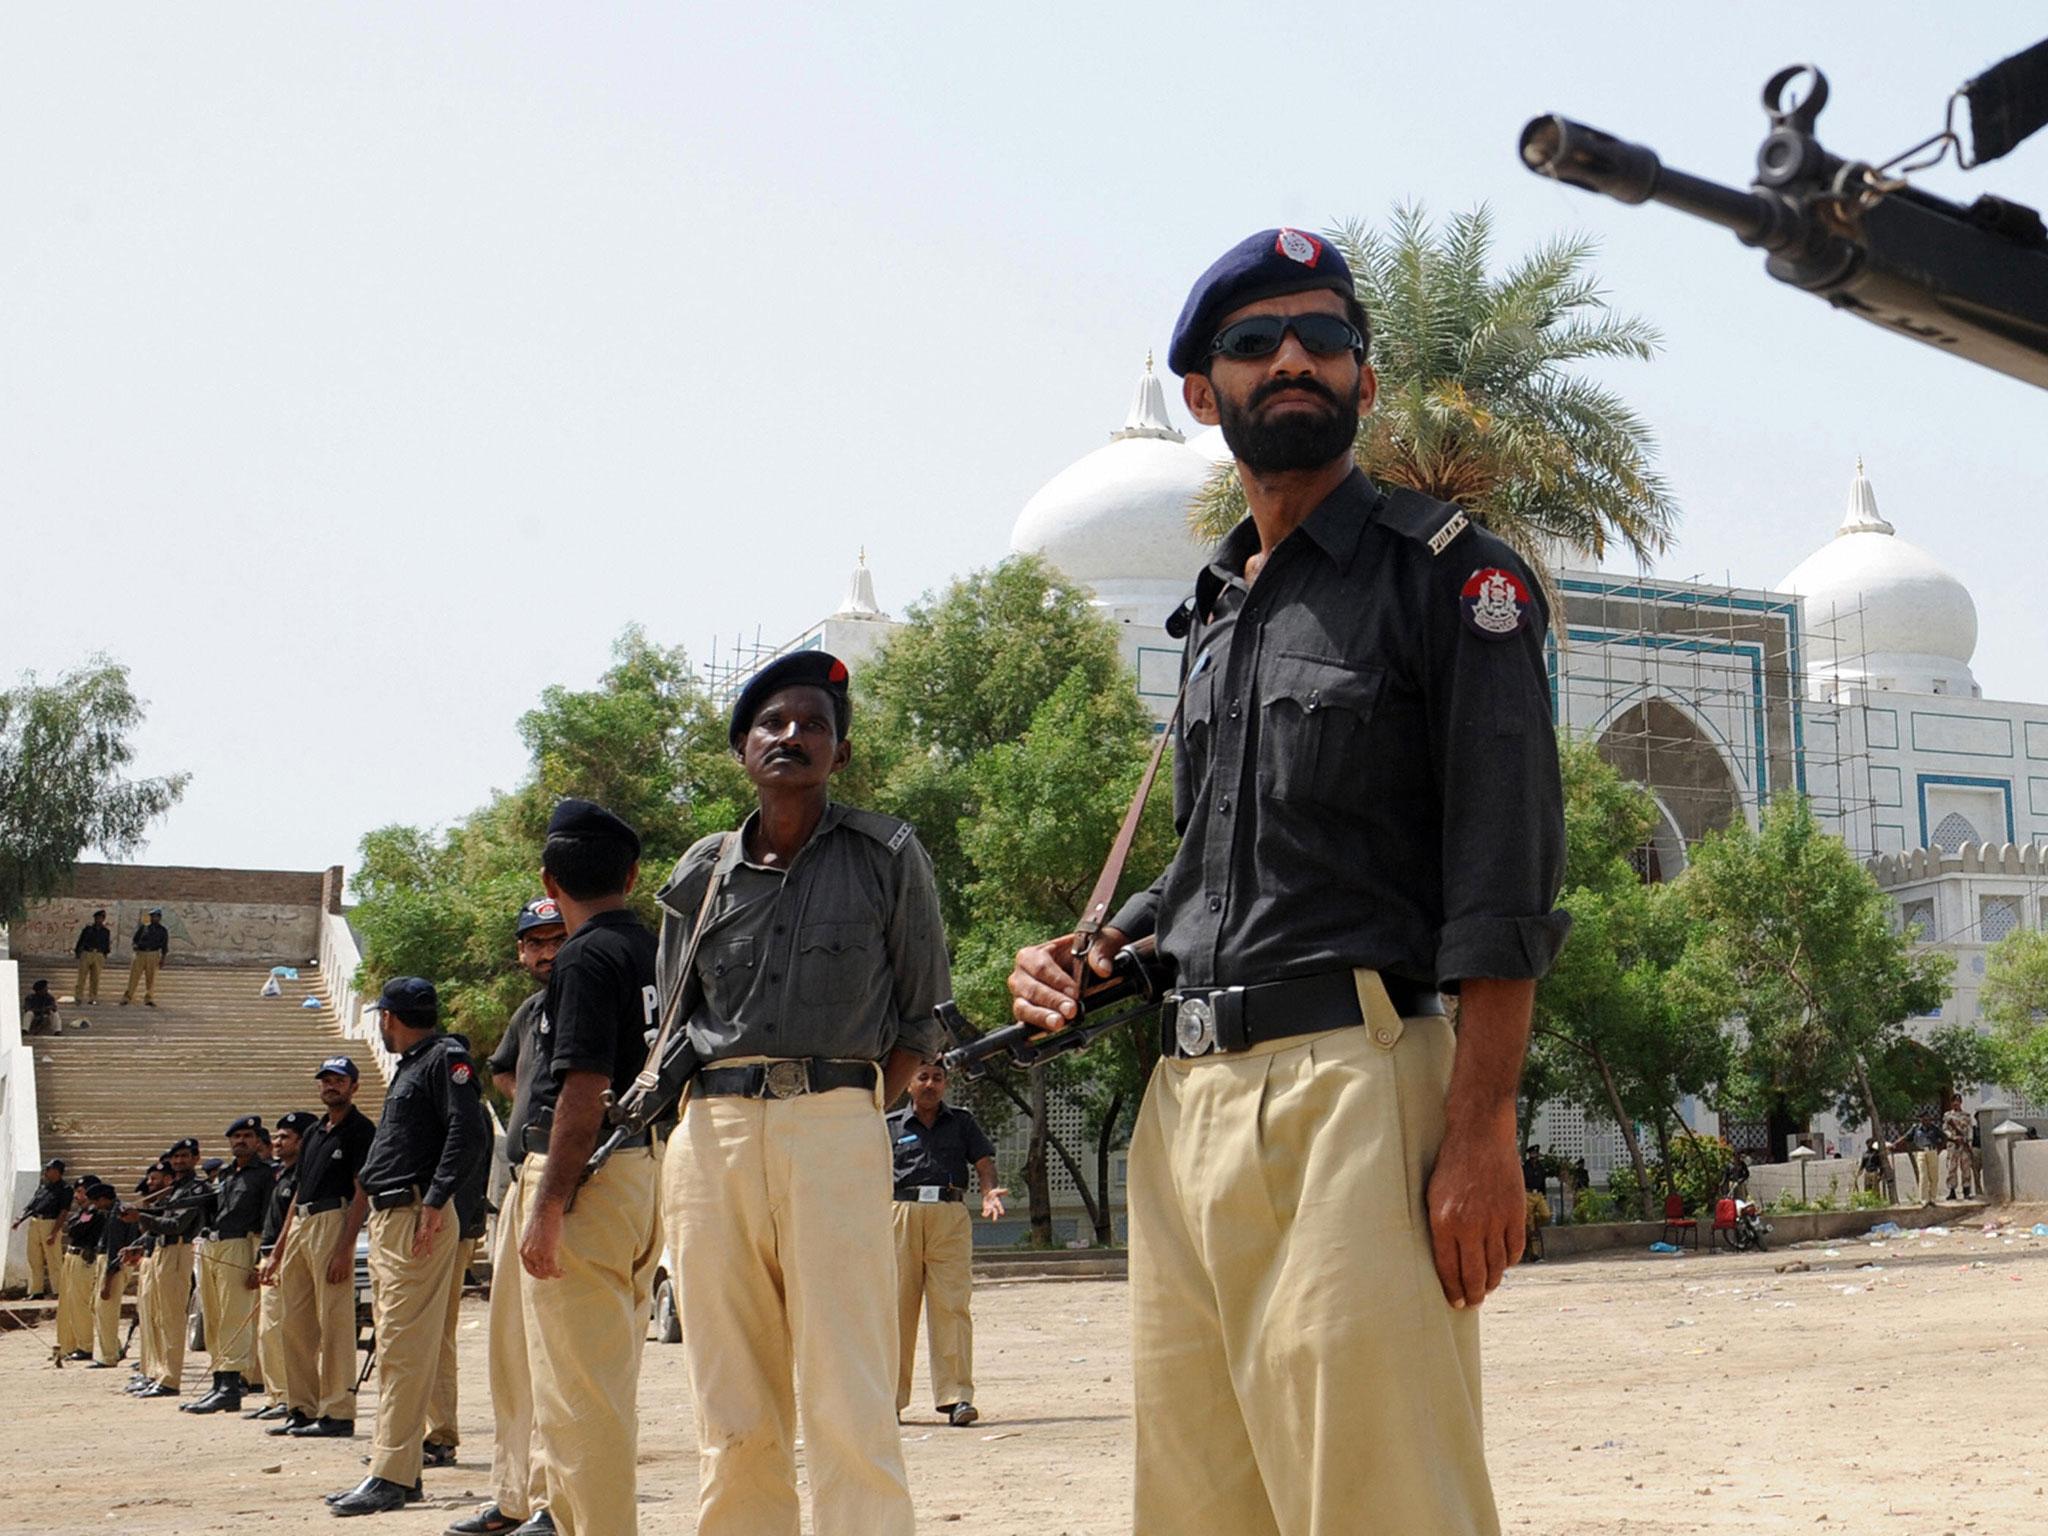 The report claims the police are 'one of the most feared, complained against and least trusted government institutions in Pakistan'